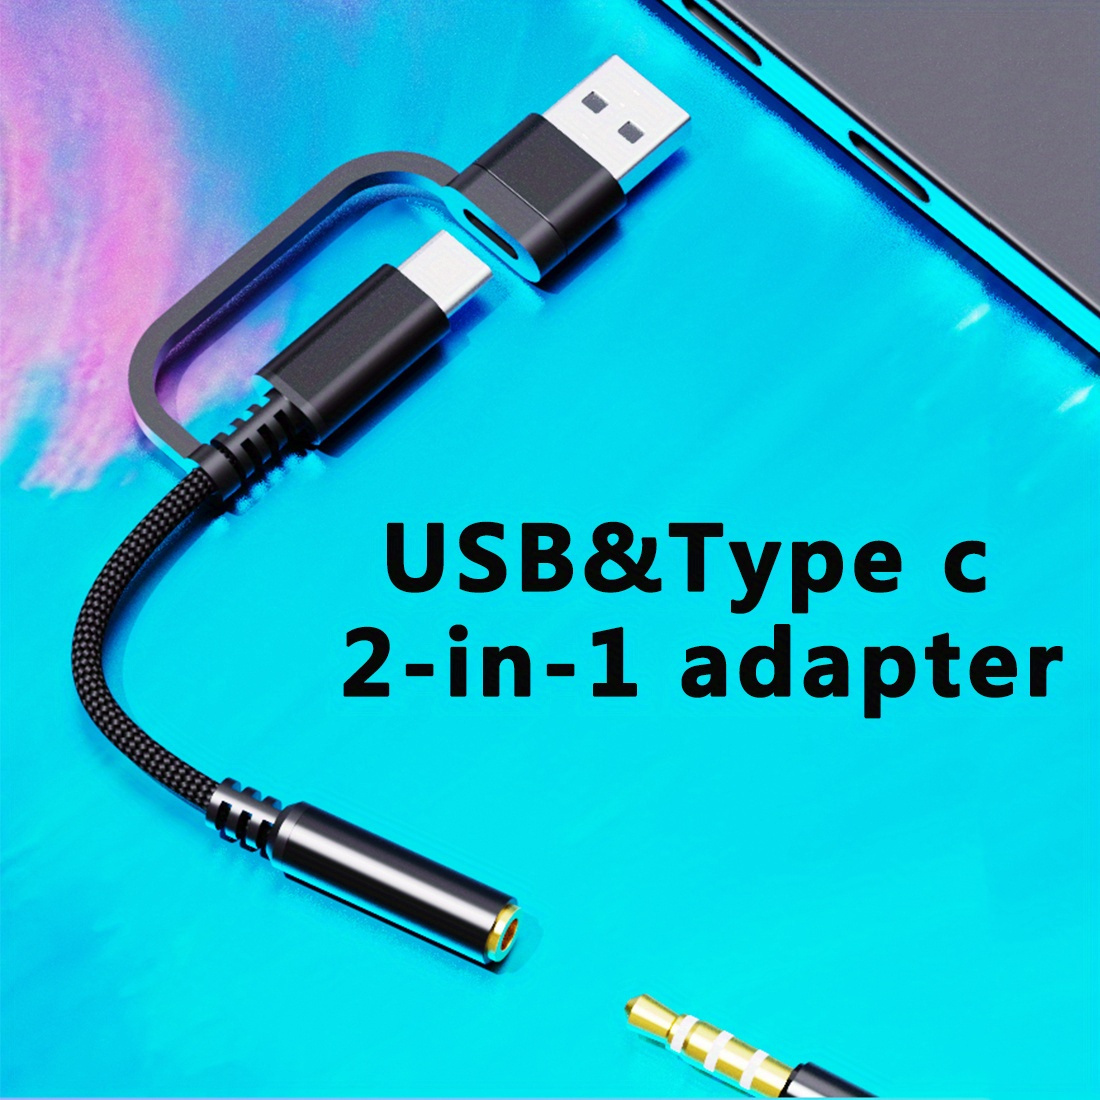 OKCSC Linum BaX T2 IPX Earphone Converter 0.78mm 2pin Cable Connector For  Westone Pro X10-X50 MACH10- 80 IEMs Earbuds Adapter